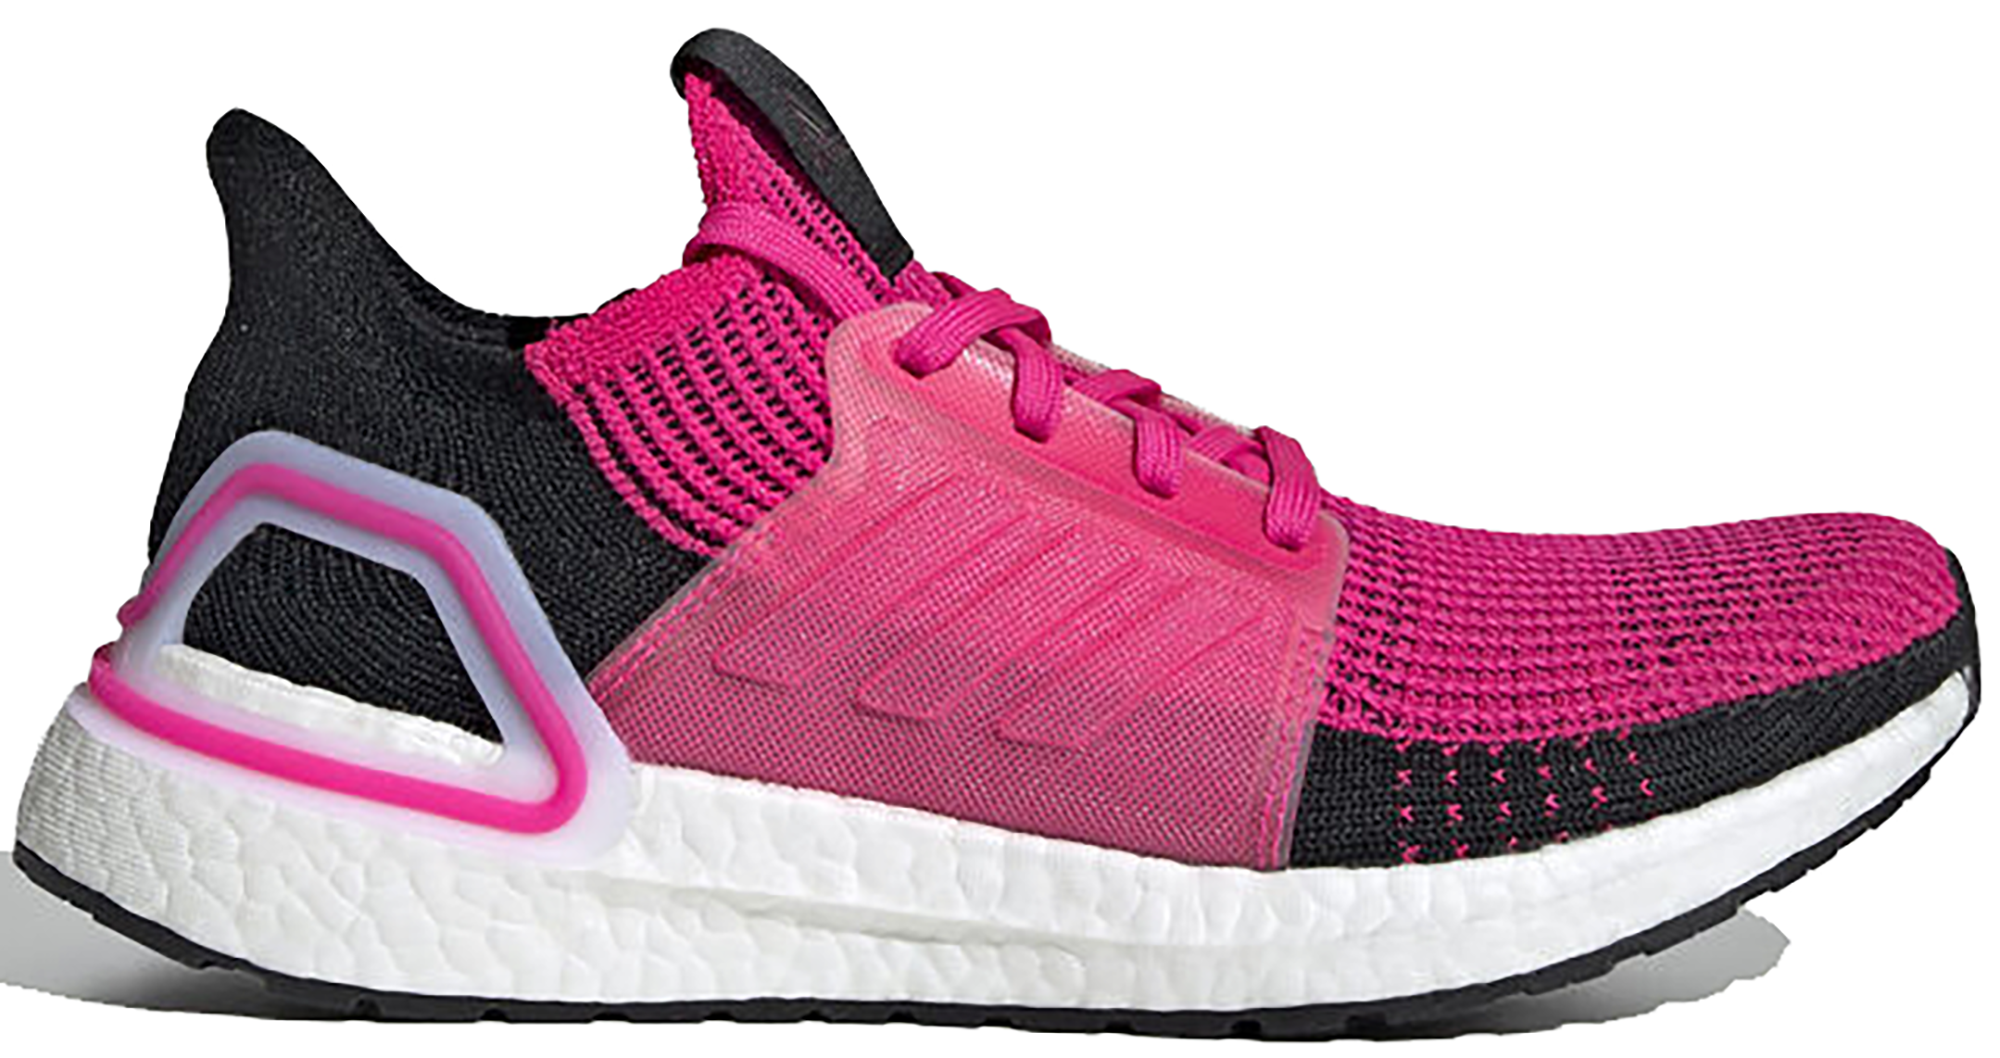 adidas boost black and pink